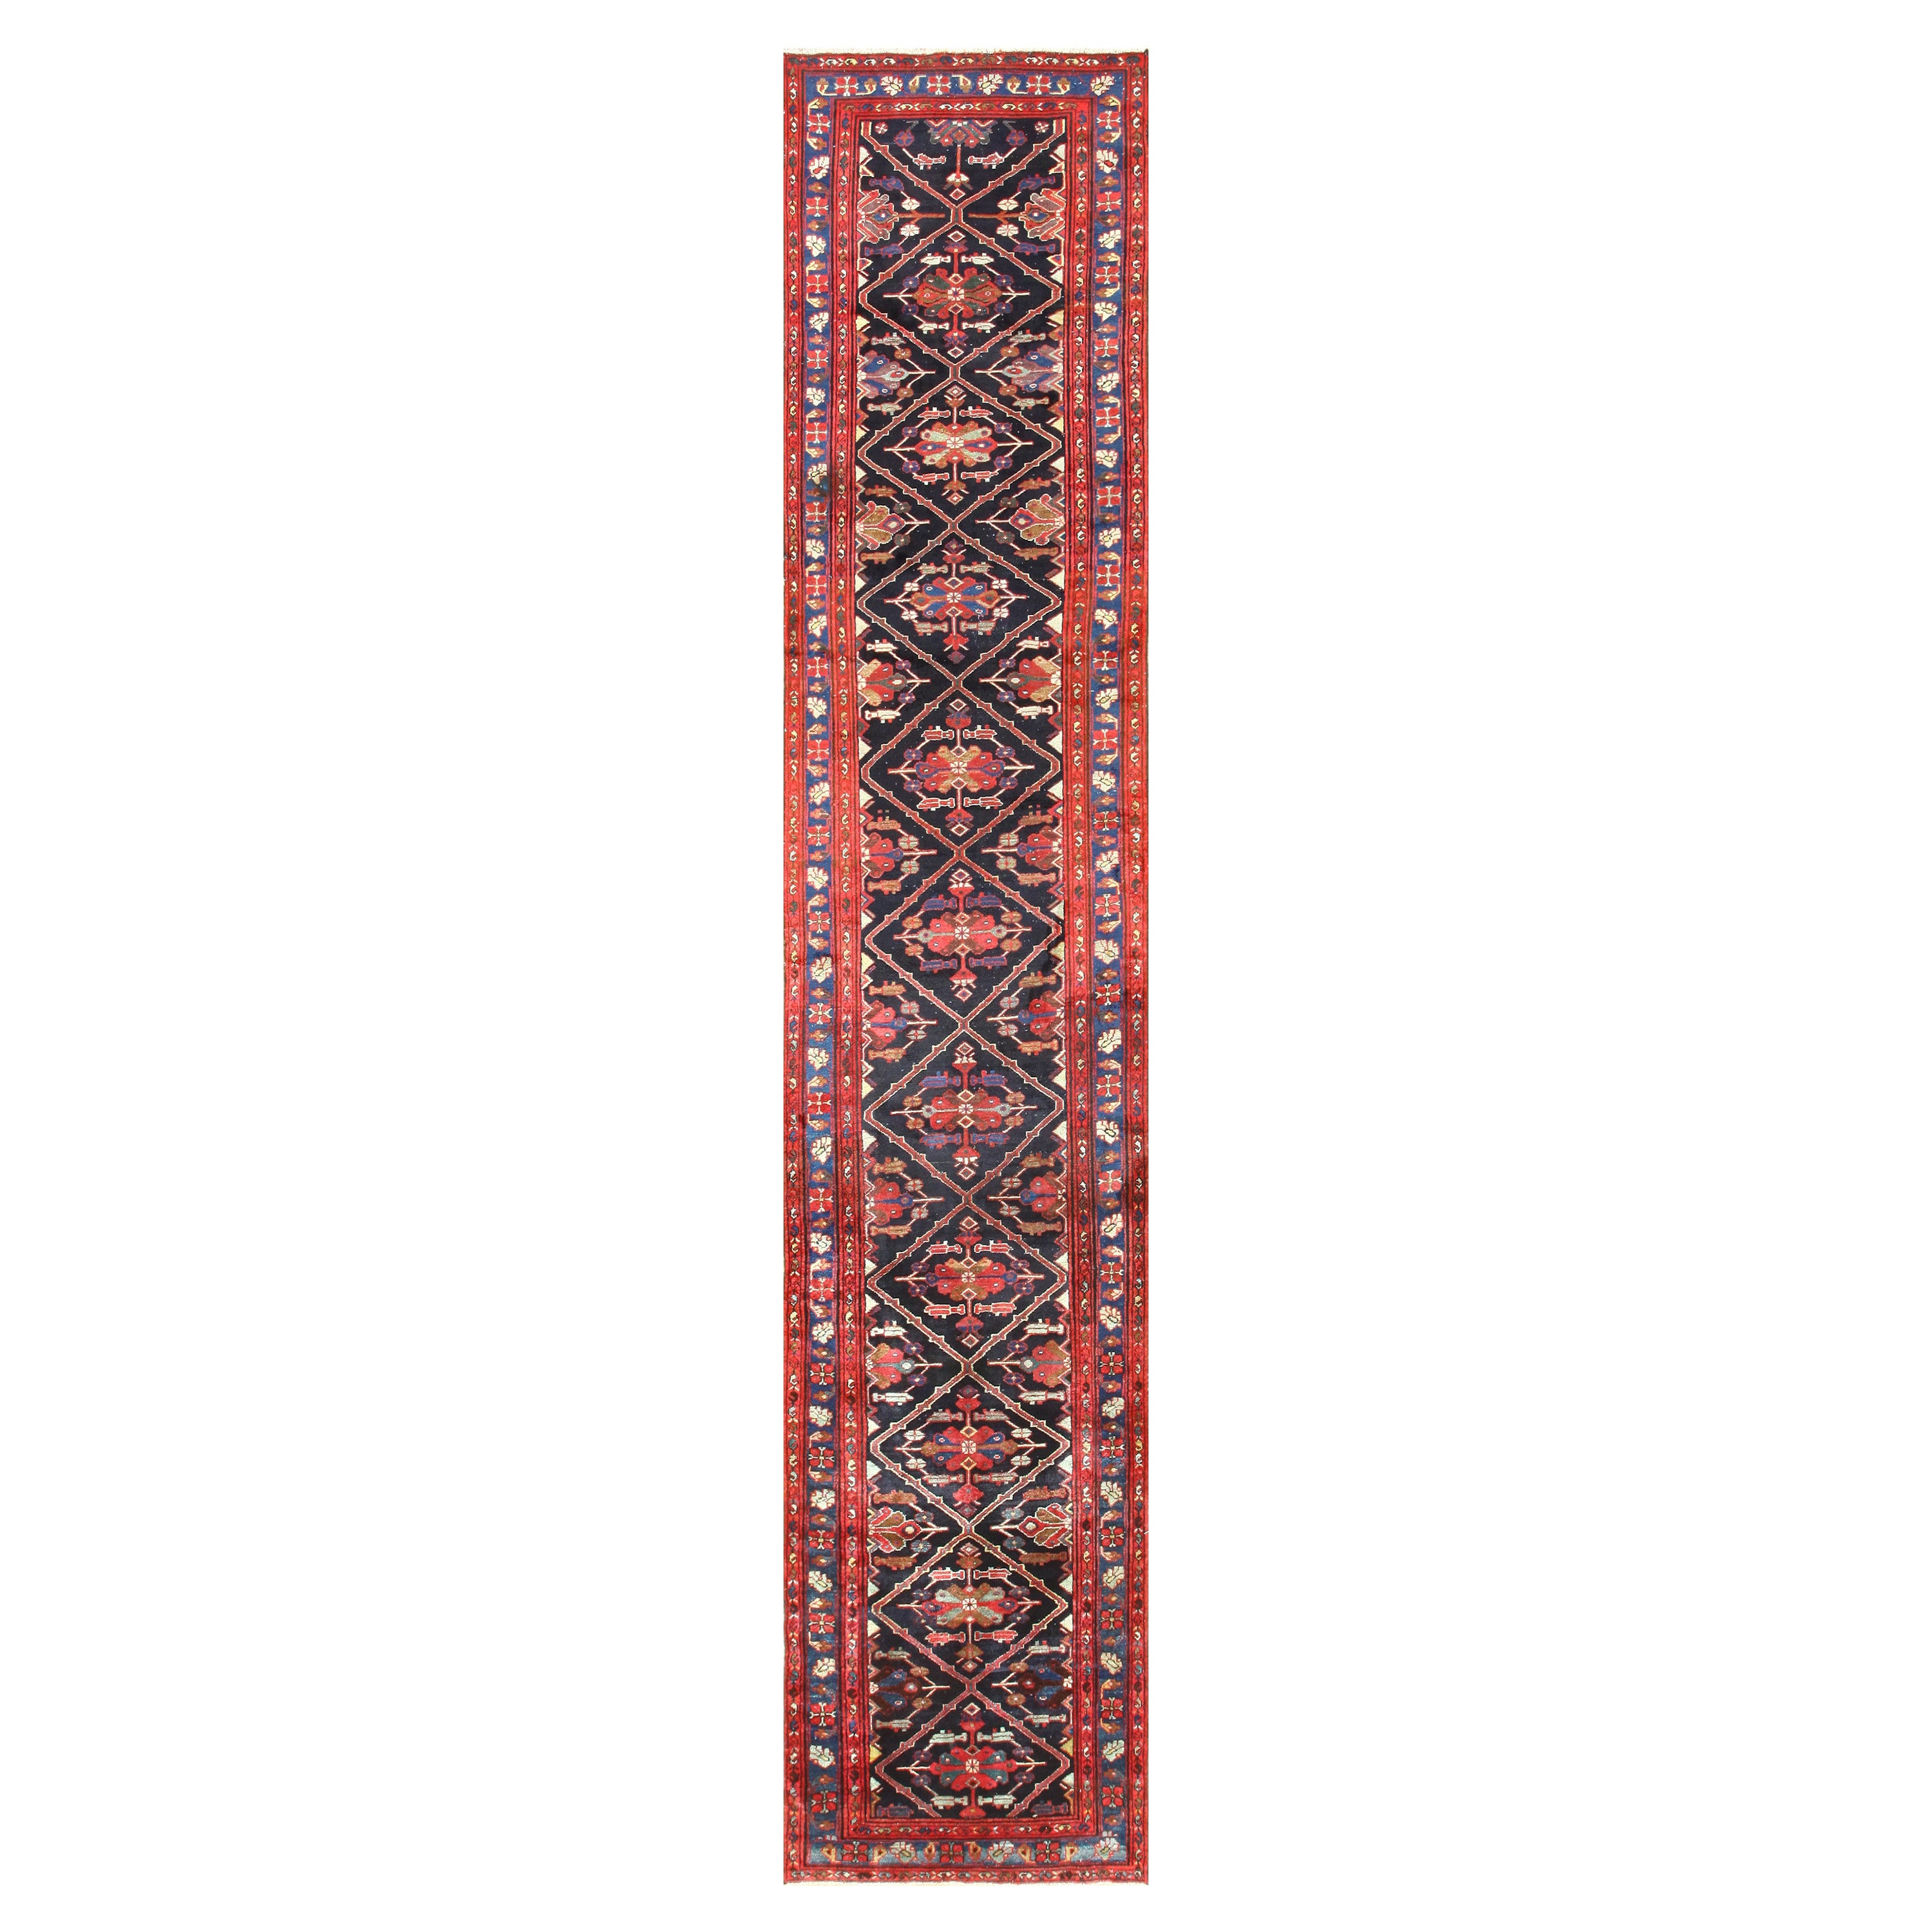 Antique Persian Malayer Runner Rug. 3' 4" x 16' 6" (1.02 m x 5.03 m) For Sale